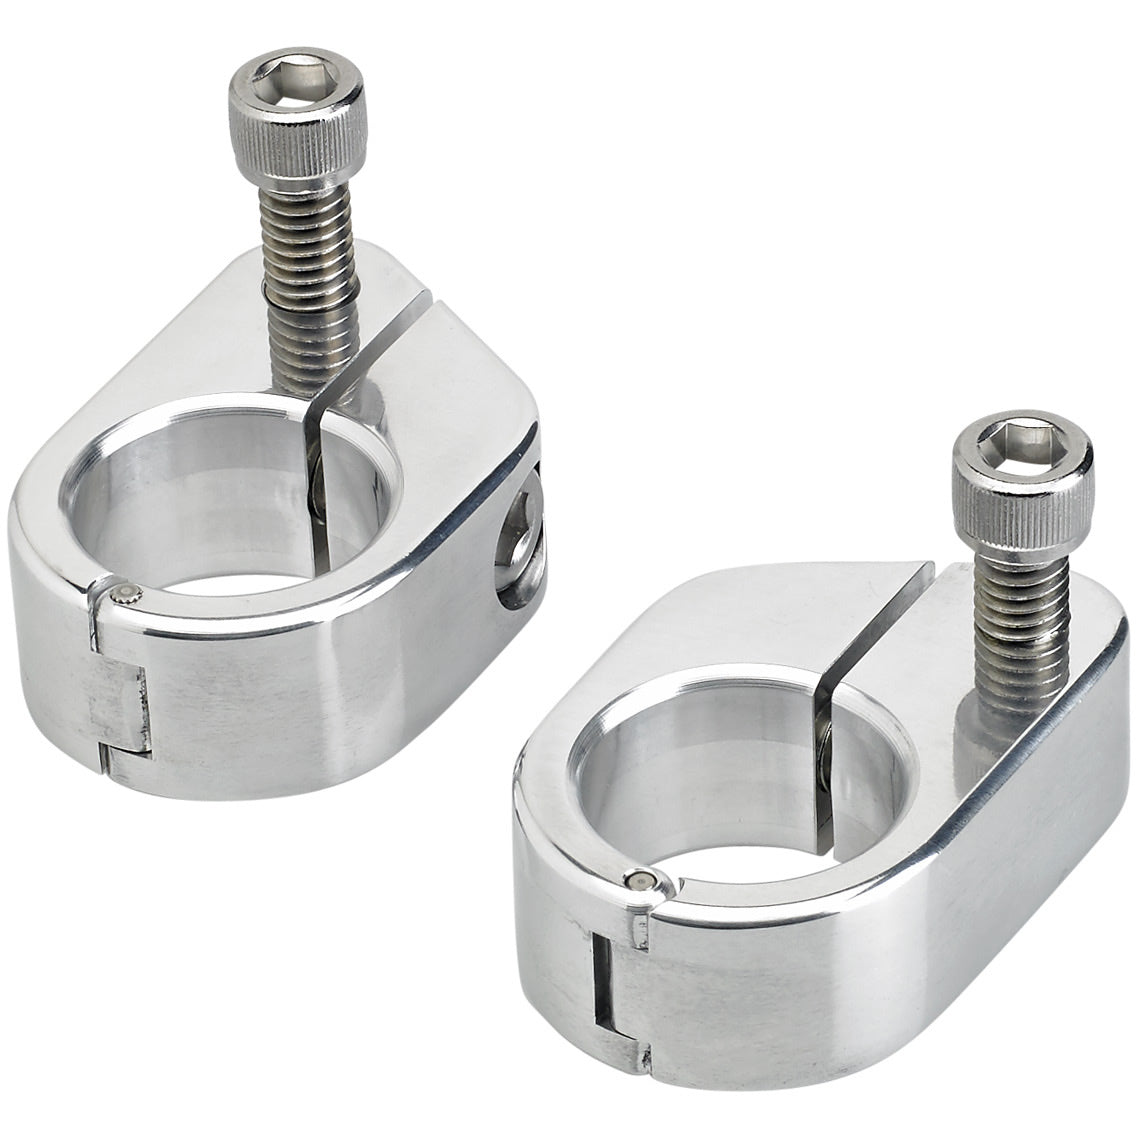 CLOSEOUT Speed Clamps - Polished